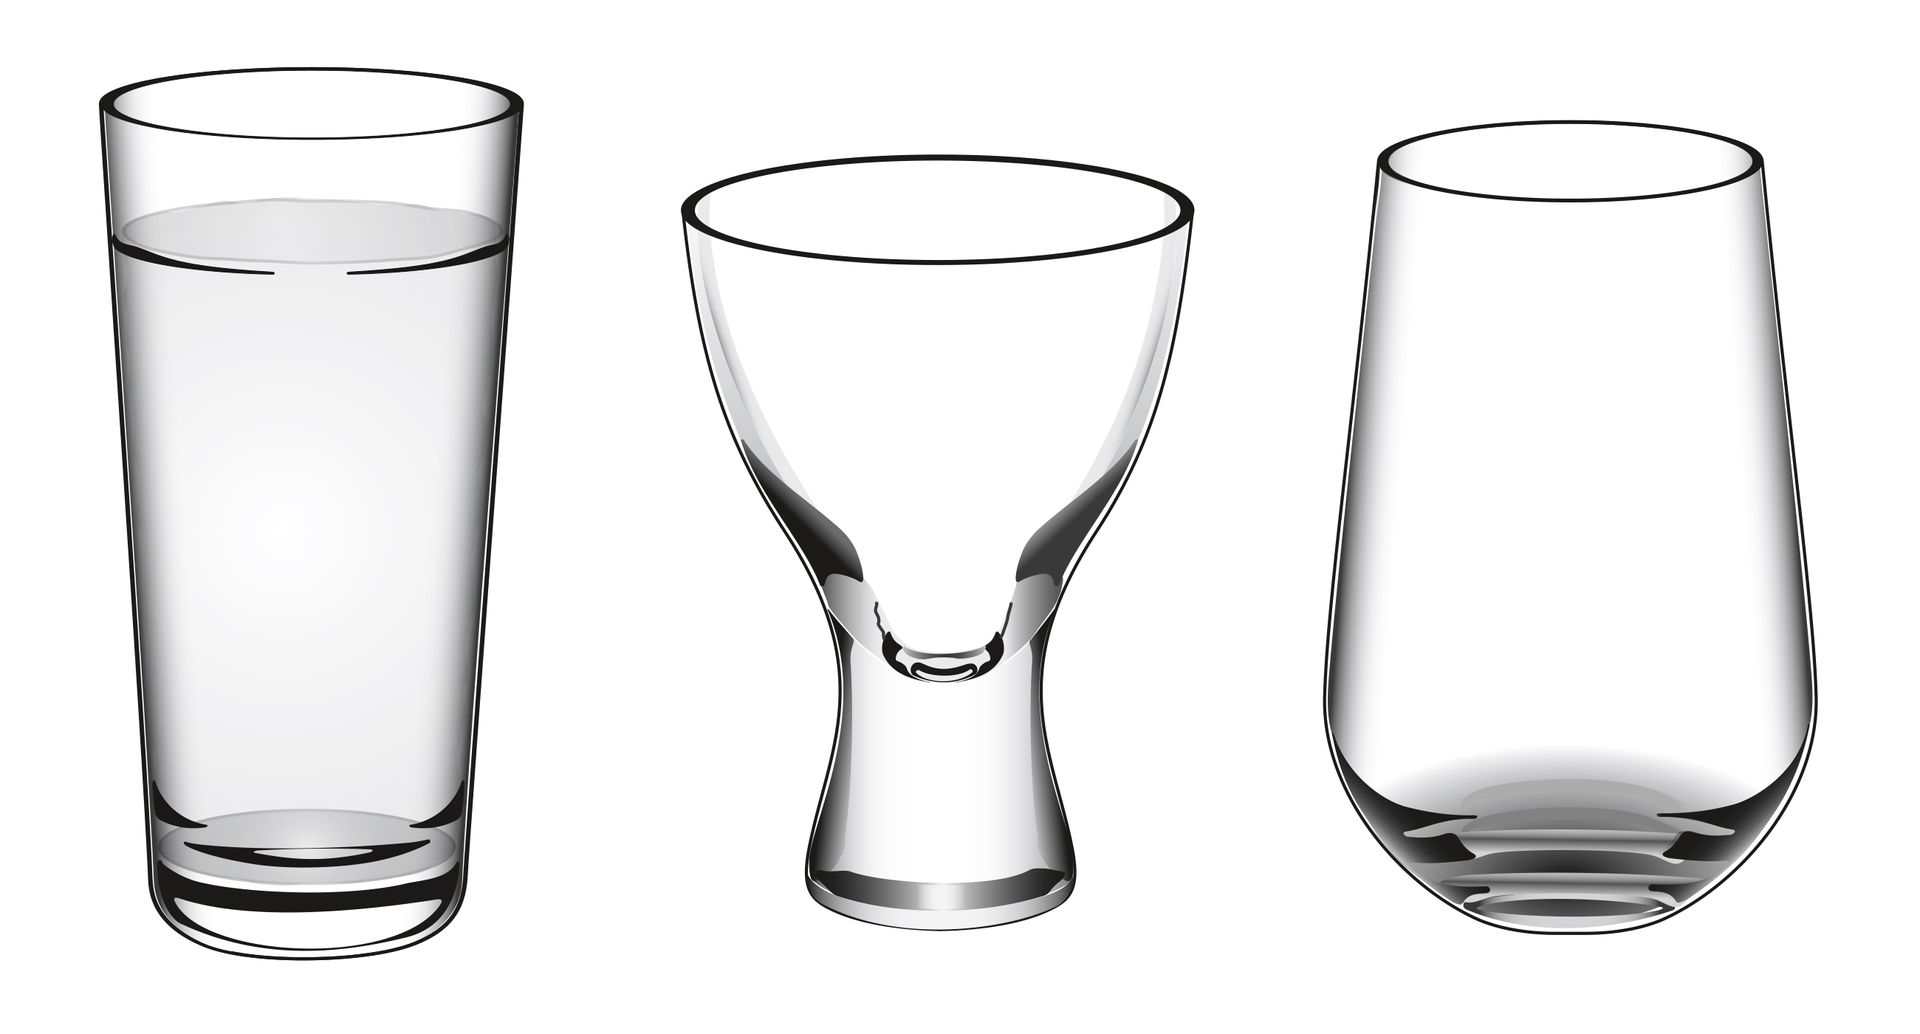 Water glasses of different shapes.